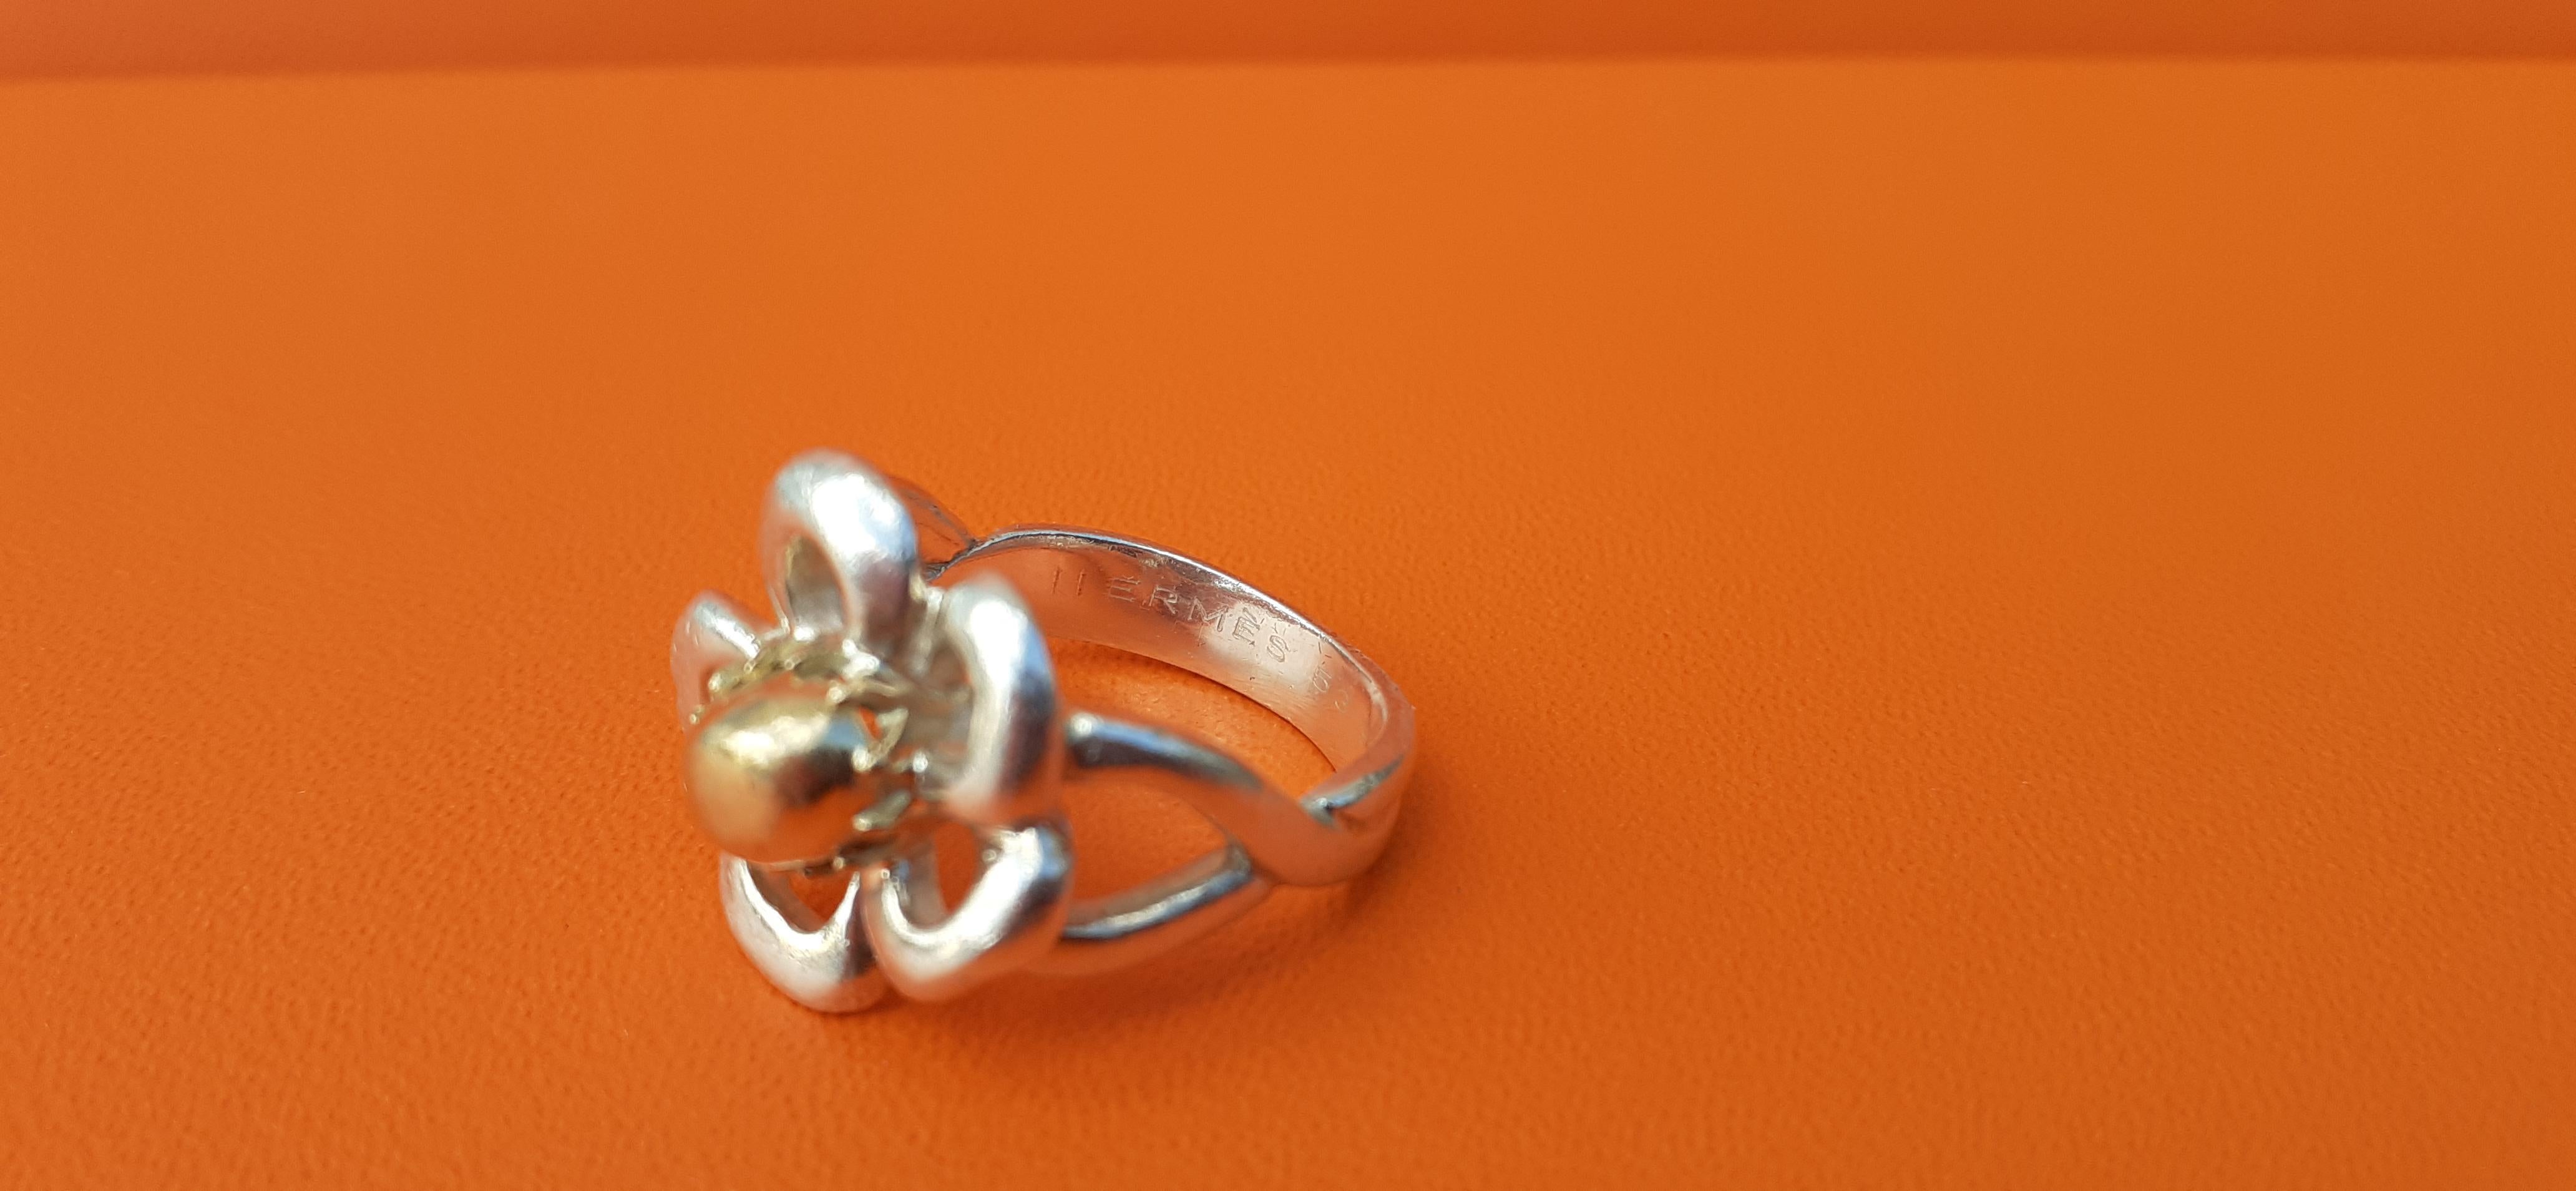 Women's Hermès Flower Shaped Ring Silver and Gold Size 7 / 53 Resizable For Sale